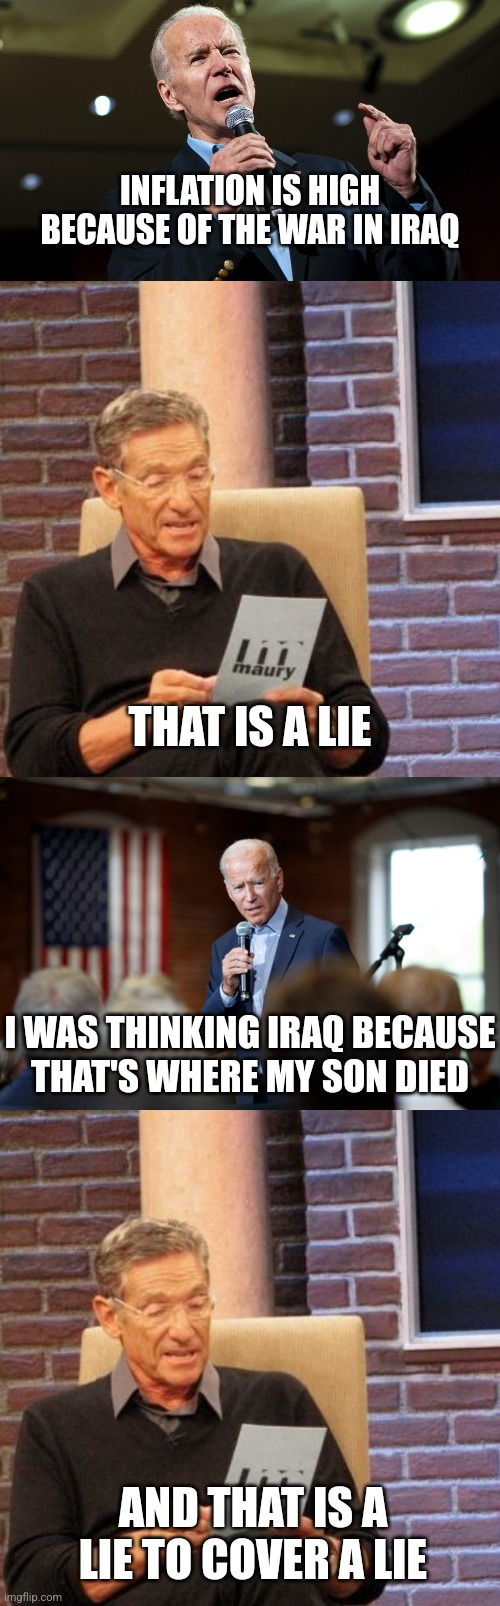 Good grief | INFLATION IS HIGH BECAUSE OF THE WAR IN IRAQ; THAT IS A LIE; I WAS THINKING IRAQ BECAUSE
THAT'S WHERE MY SON DIED; AND THAT IS A LIE TO COVER A LIE | image tagged in biden speech,memes,maury lie detector,joe biden speech patriotic,democrats | made w/ Imgflip meme maker